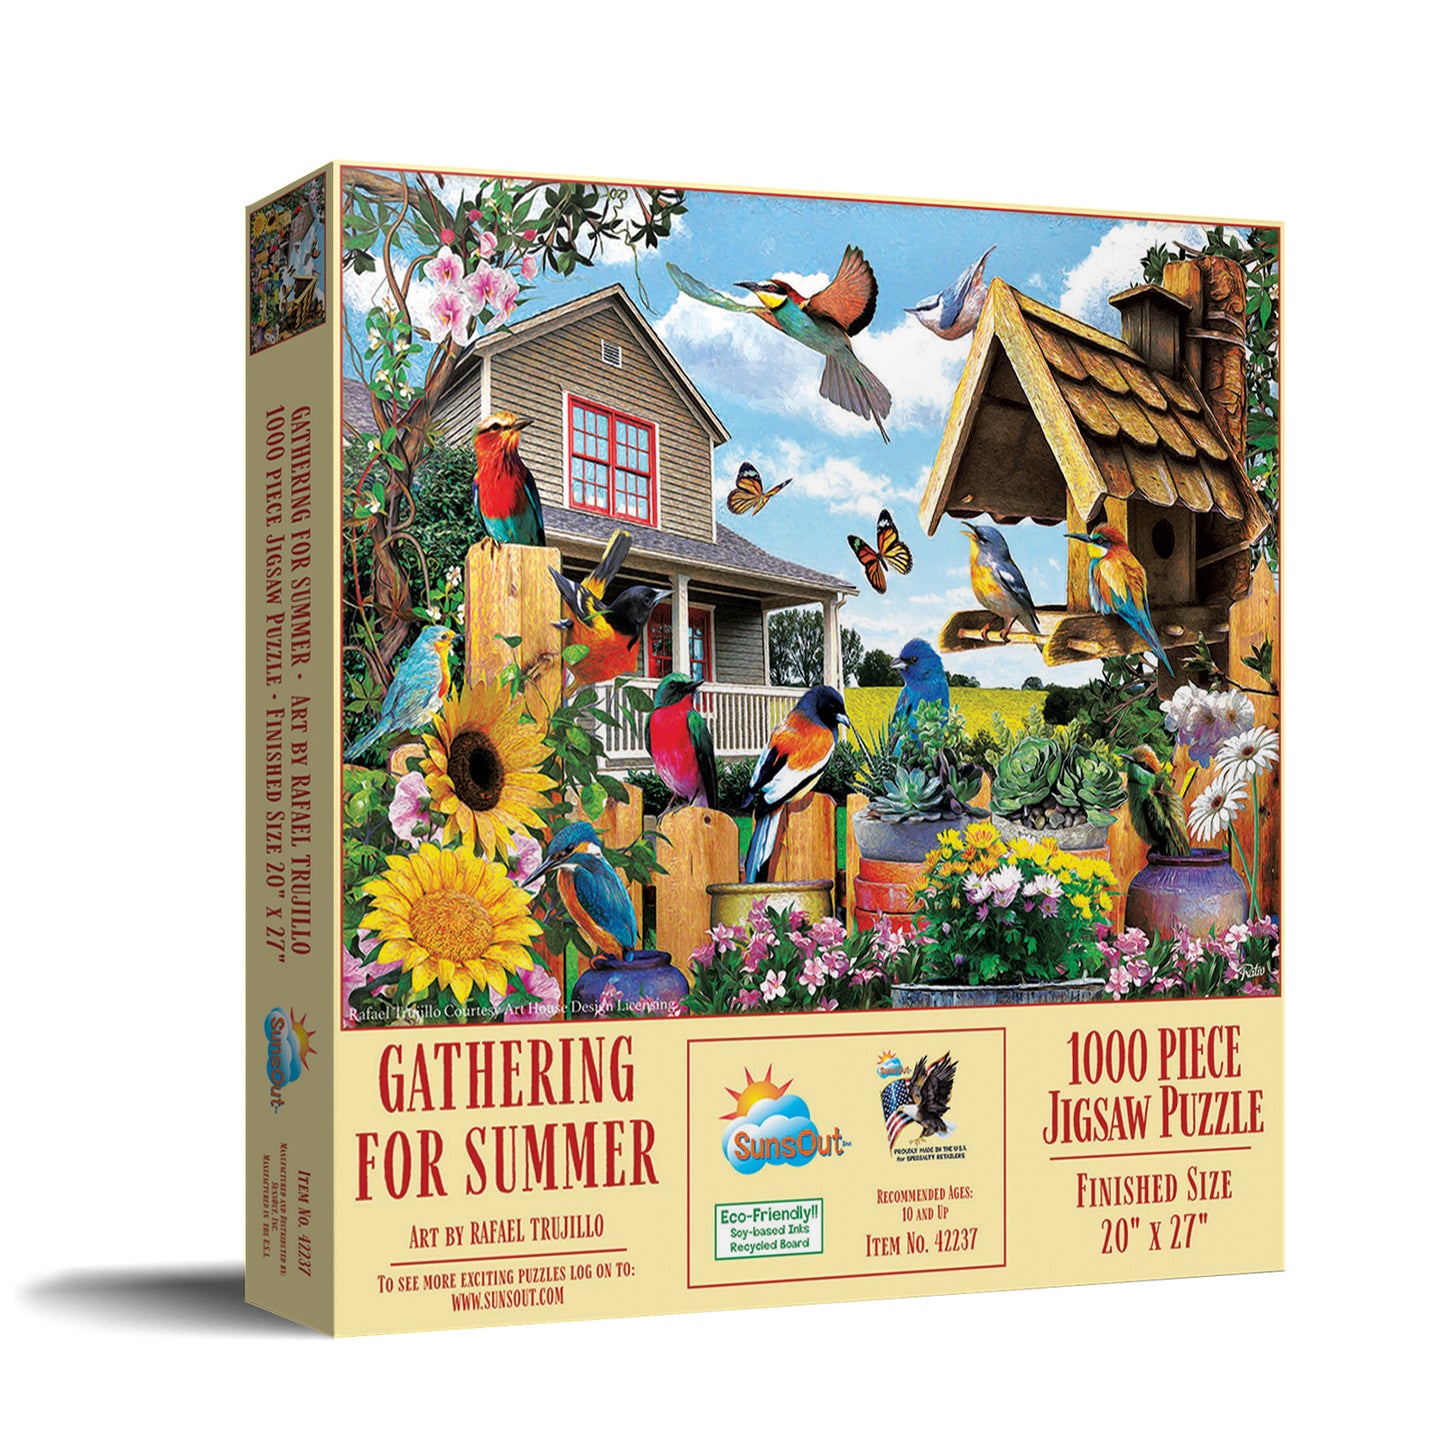 Gathering for Summer - 1000 Piece Jigsaw Puzzle